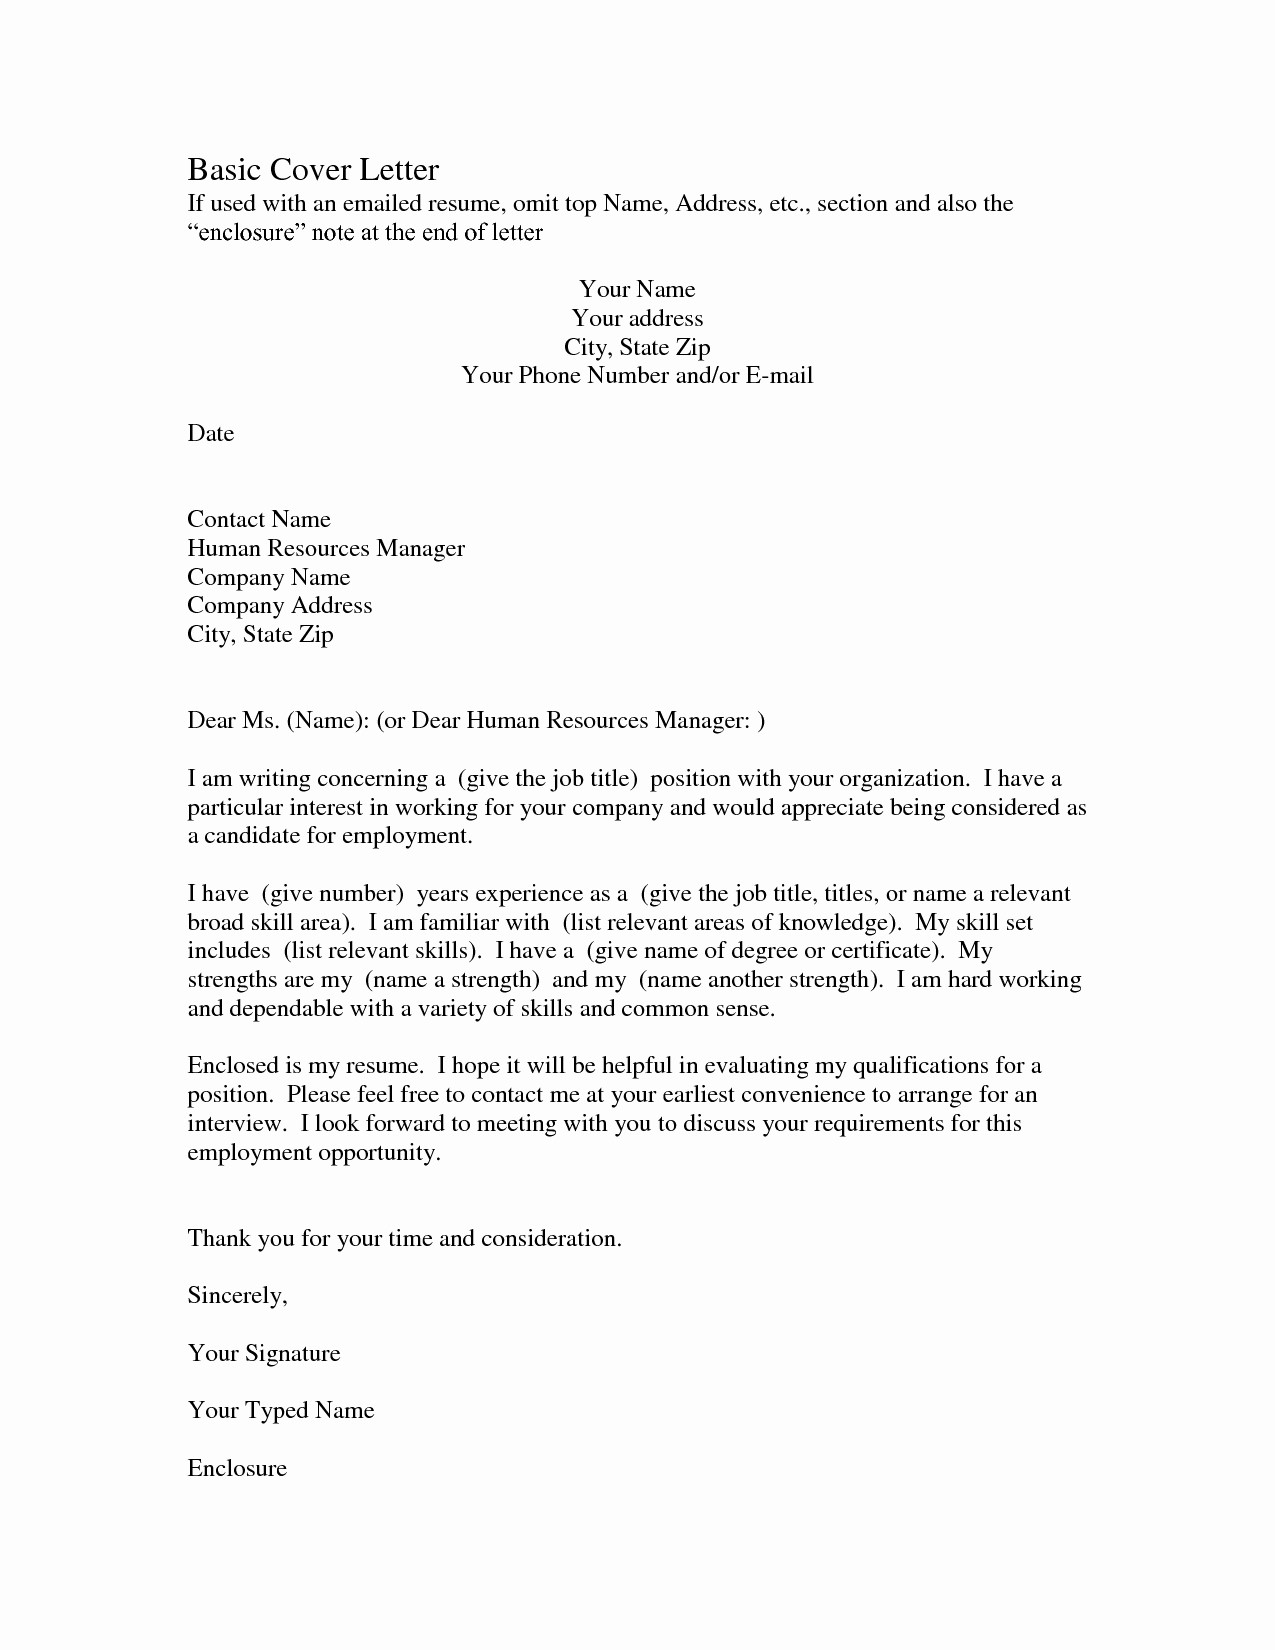 Microsoft Word Cover Letter Template - Microsoft Word Cover Letter Template Recordplayerorchestra